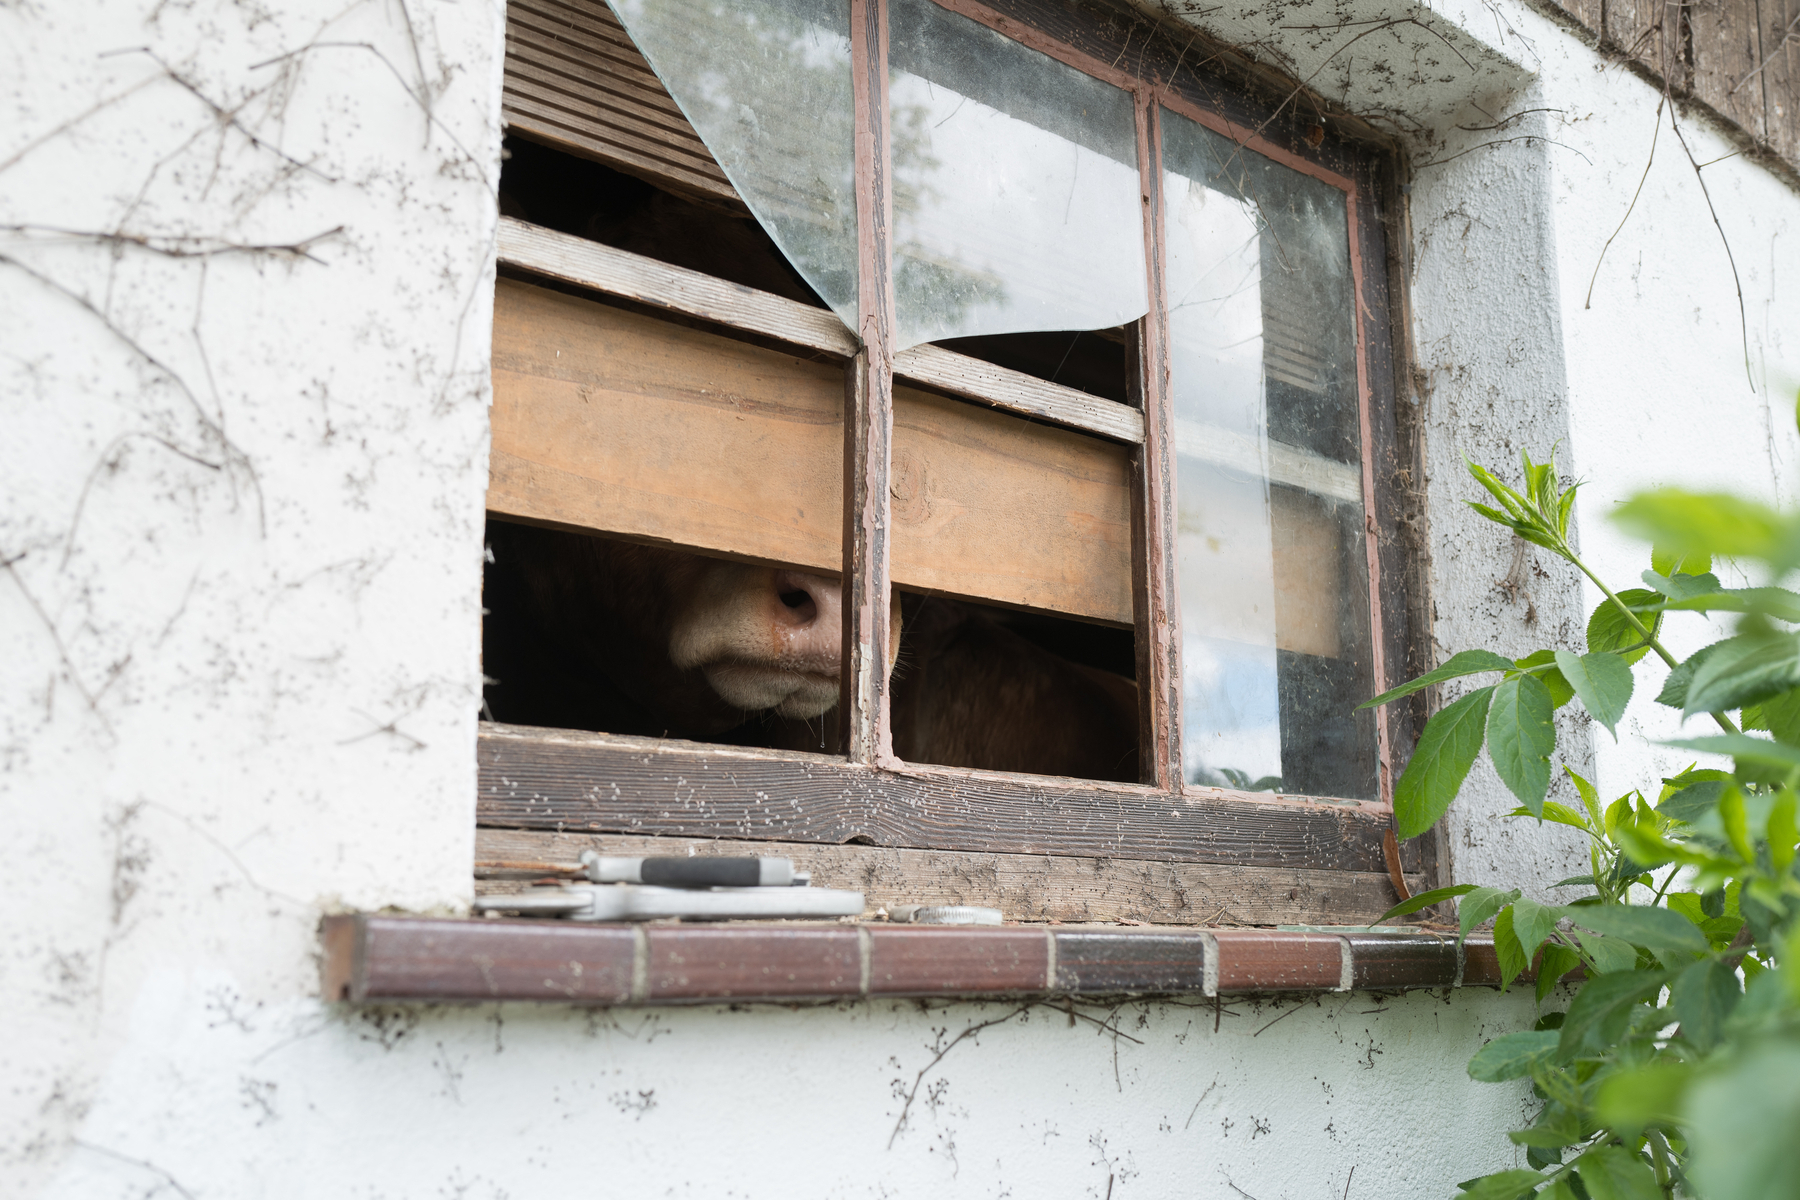 Snoot of a cow visible through a half broke, half boarded up window of a barn. The rest of the cow is hidden in shadows. On the window ledge a lay pair of gardening scissors. 